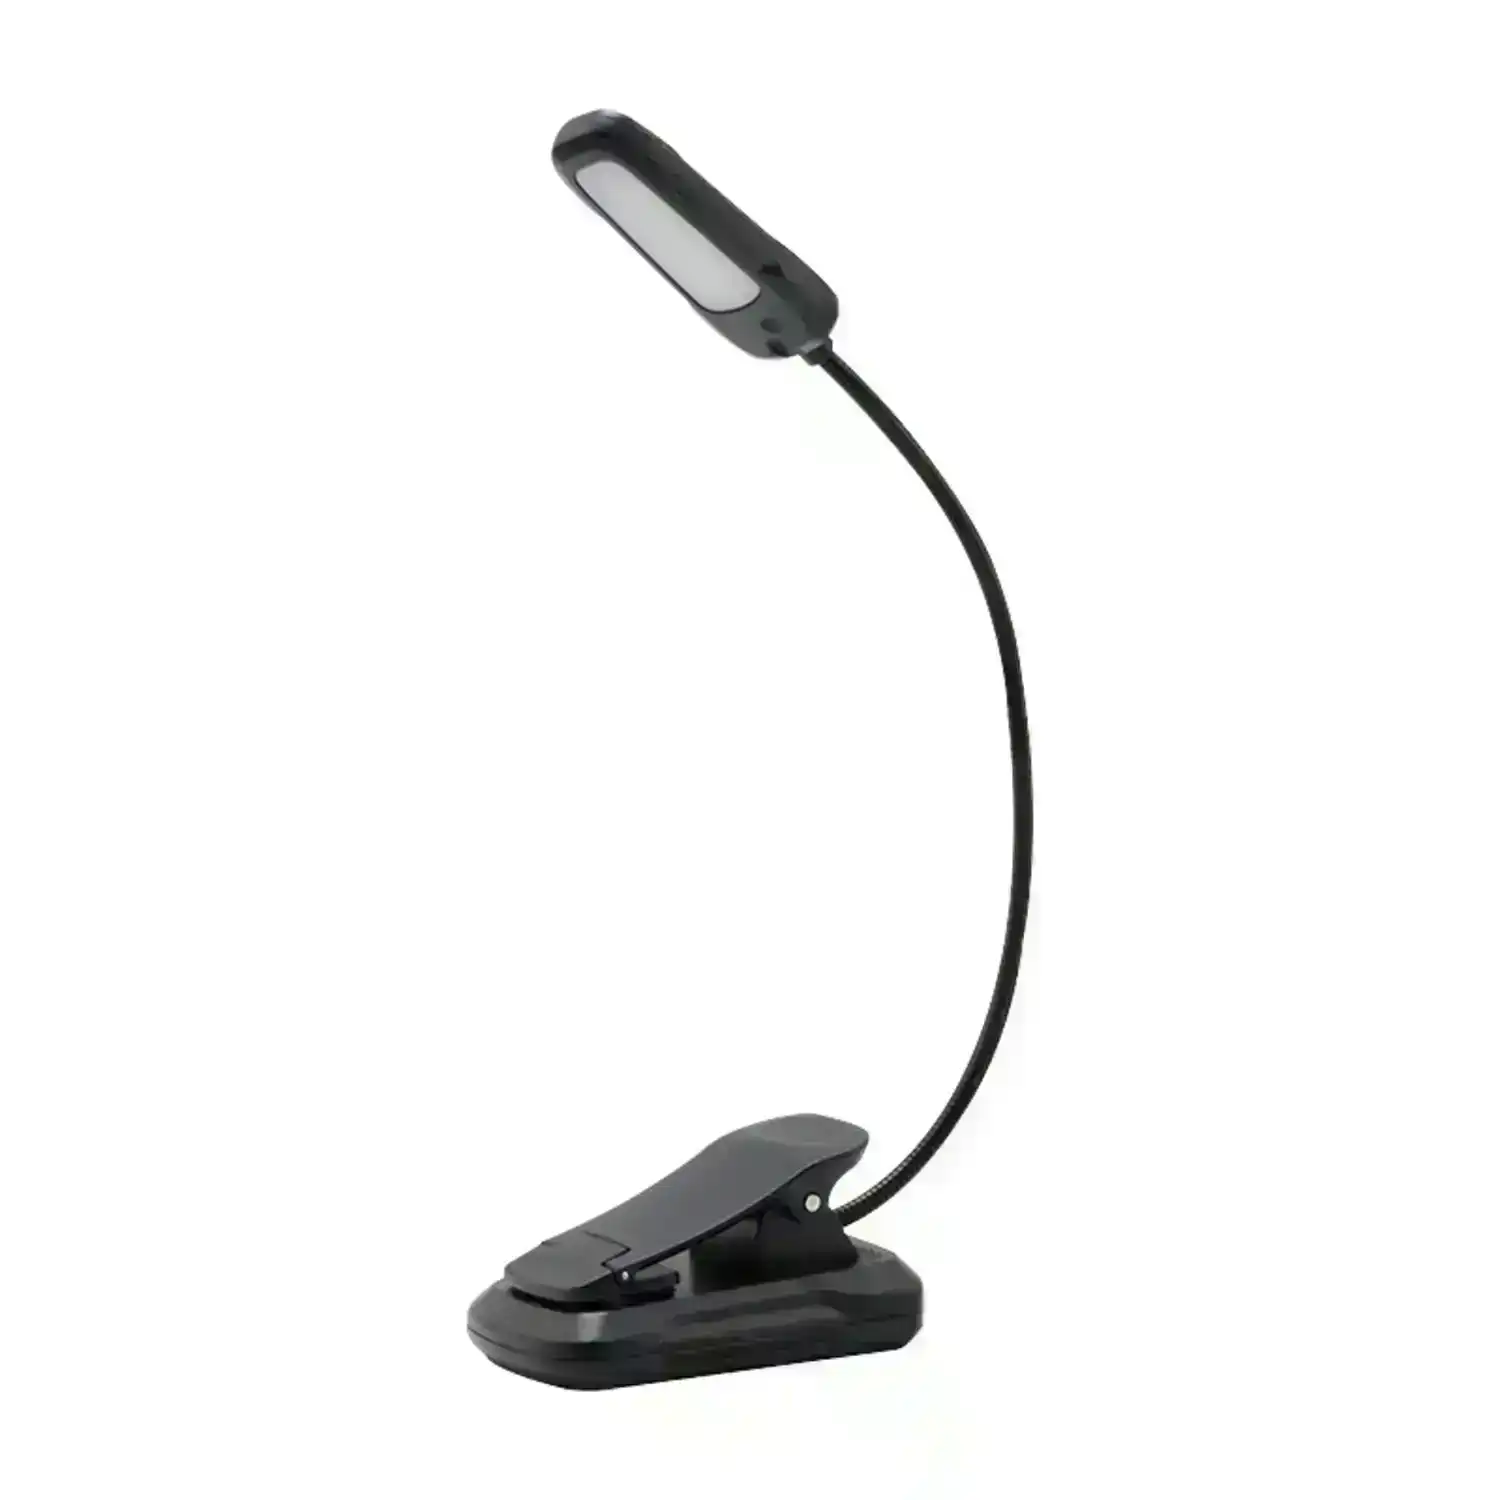 Gominimo USB Rechargeable LED Clip Book Light with Eye-Protection 9 LED Bulbs